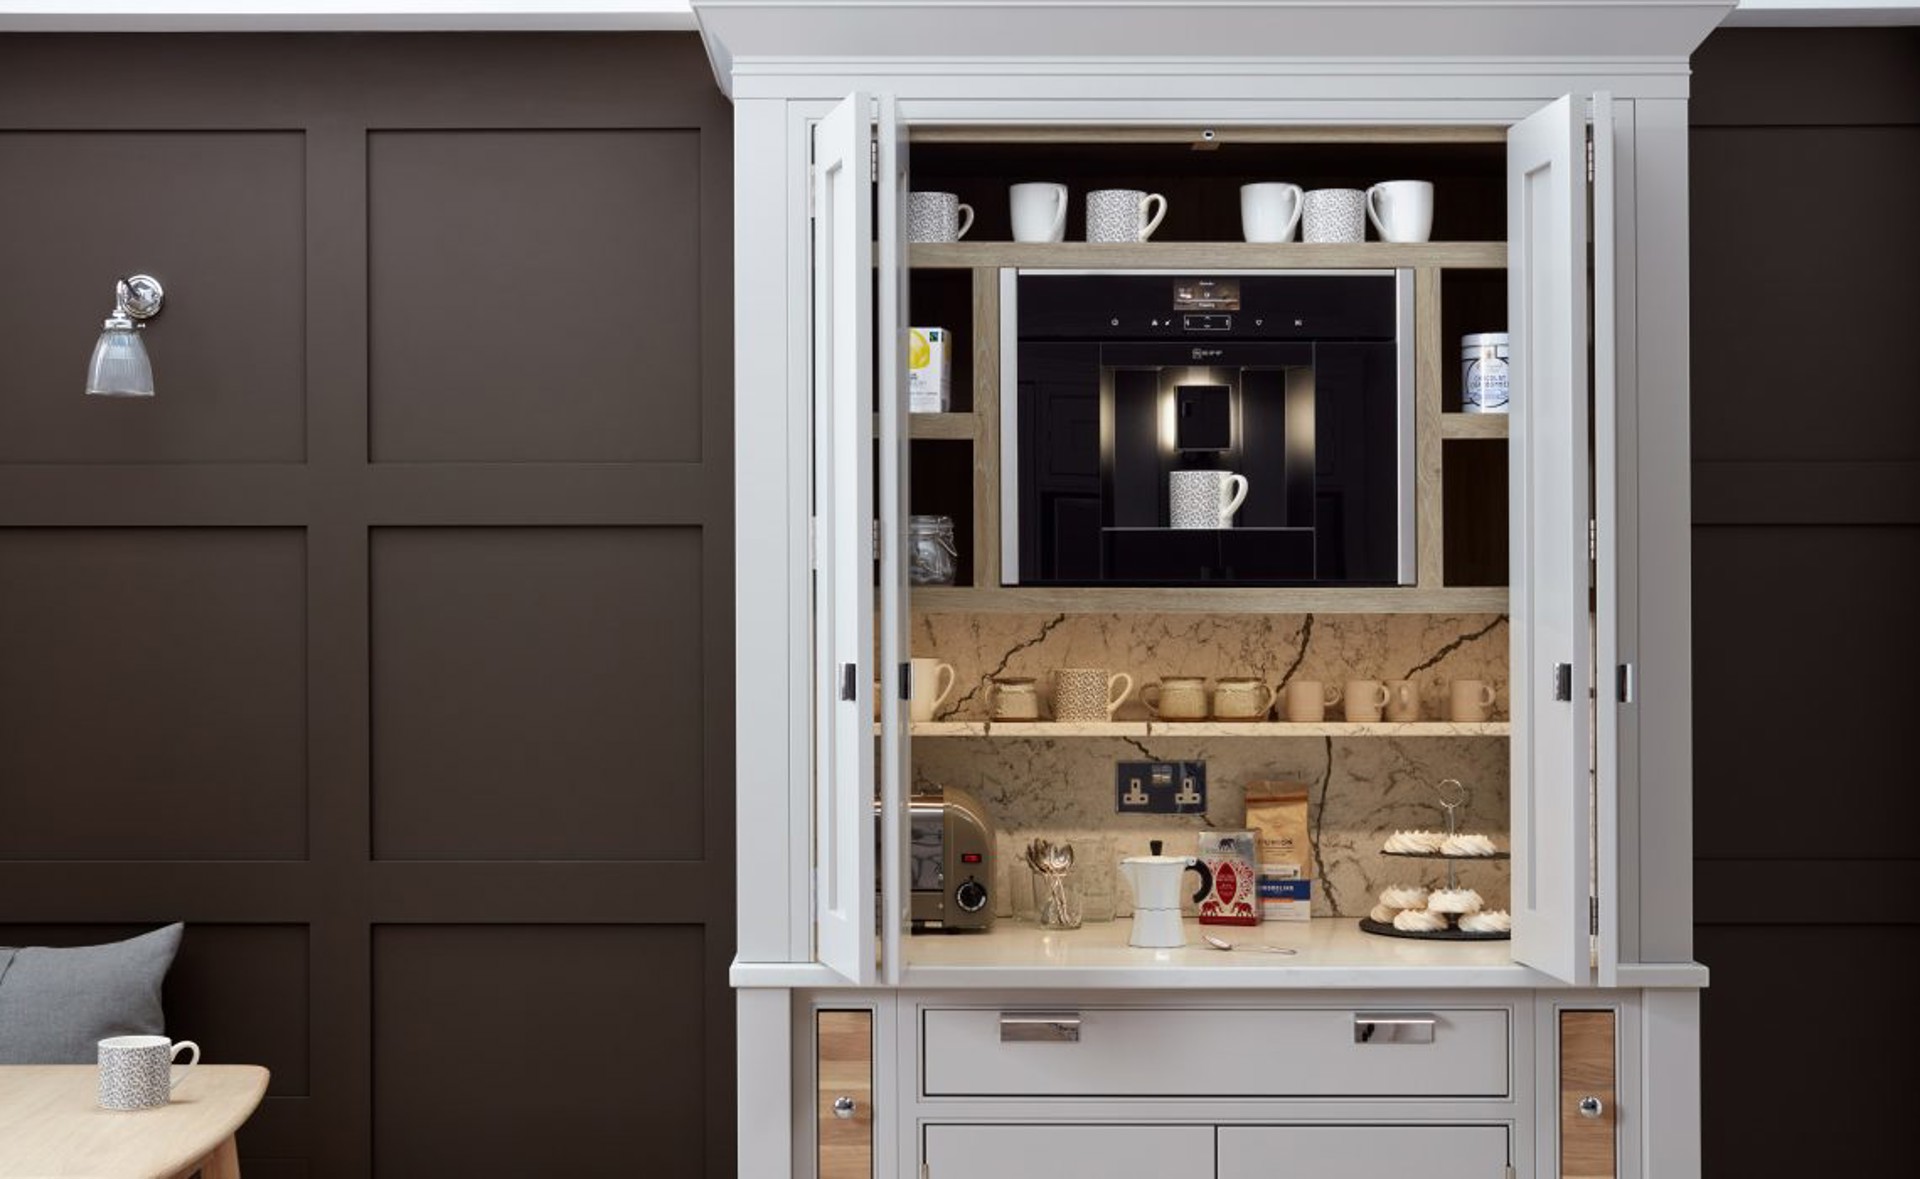 Hidden Coffee Maker and Microwave in Pantry Cabinets with Fold In Doors -  Transitional - Kitchen